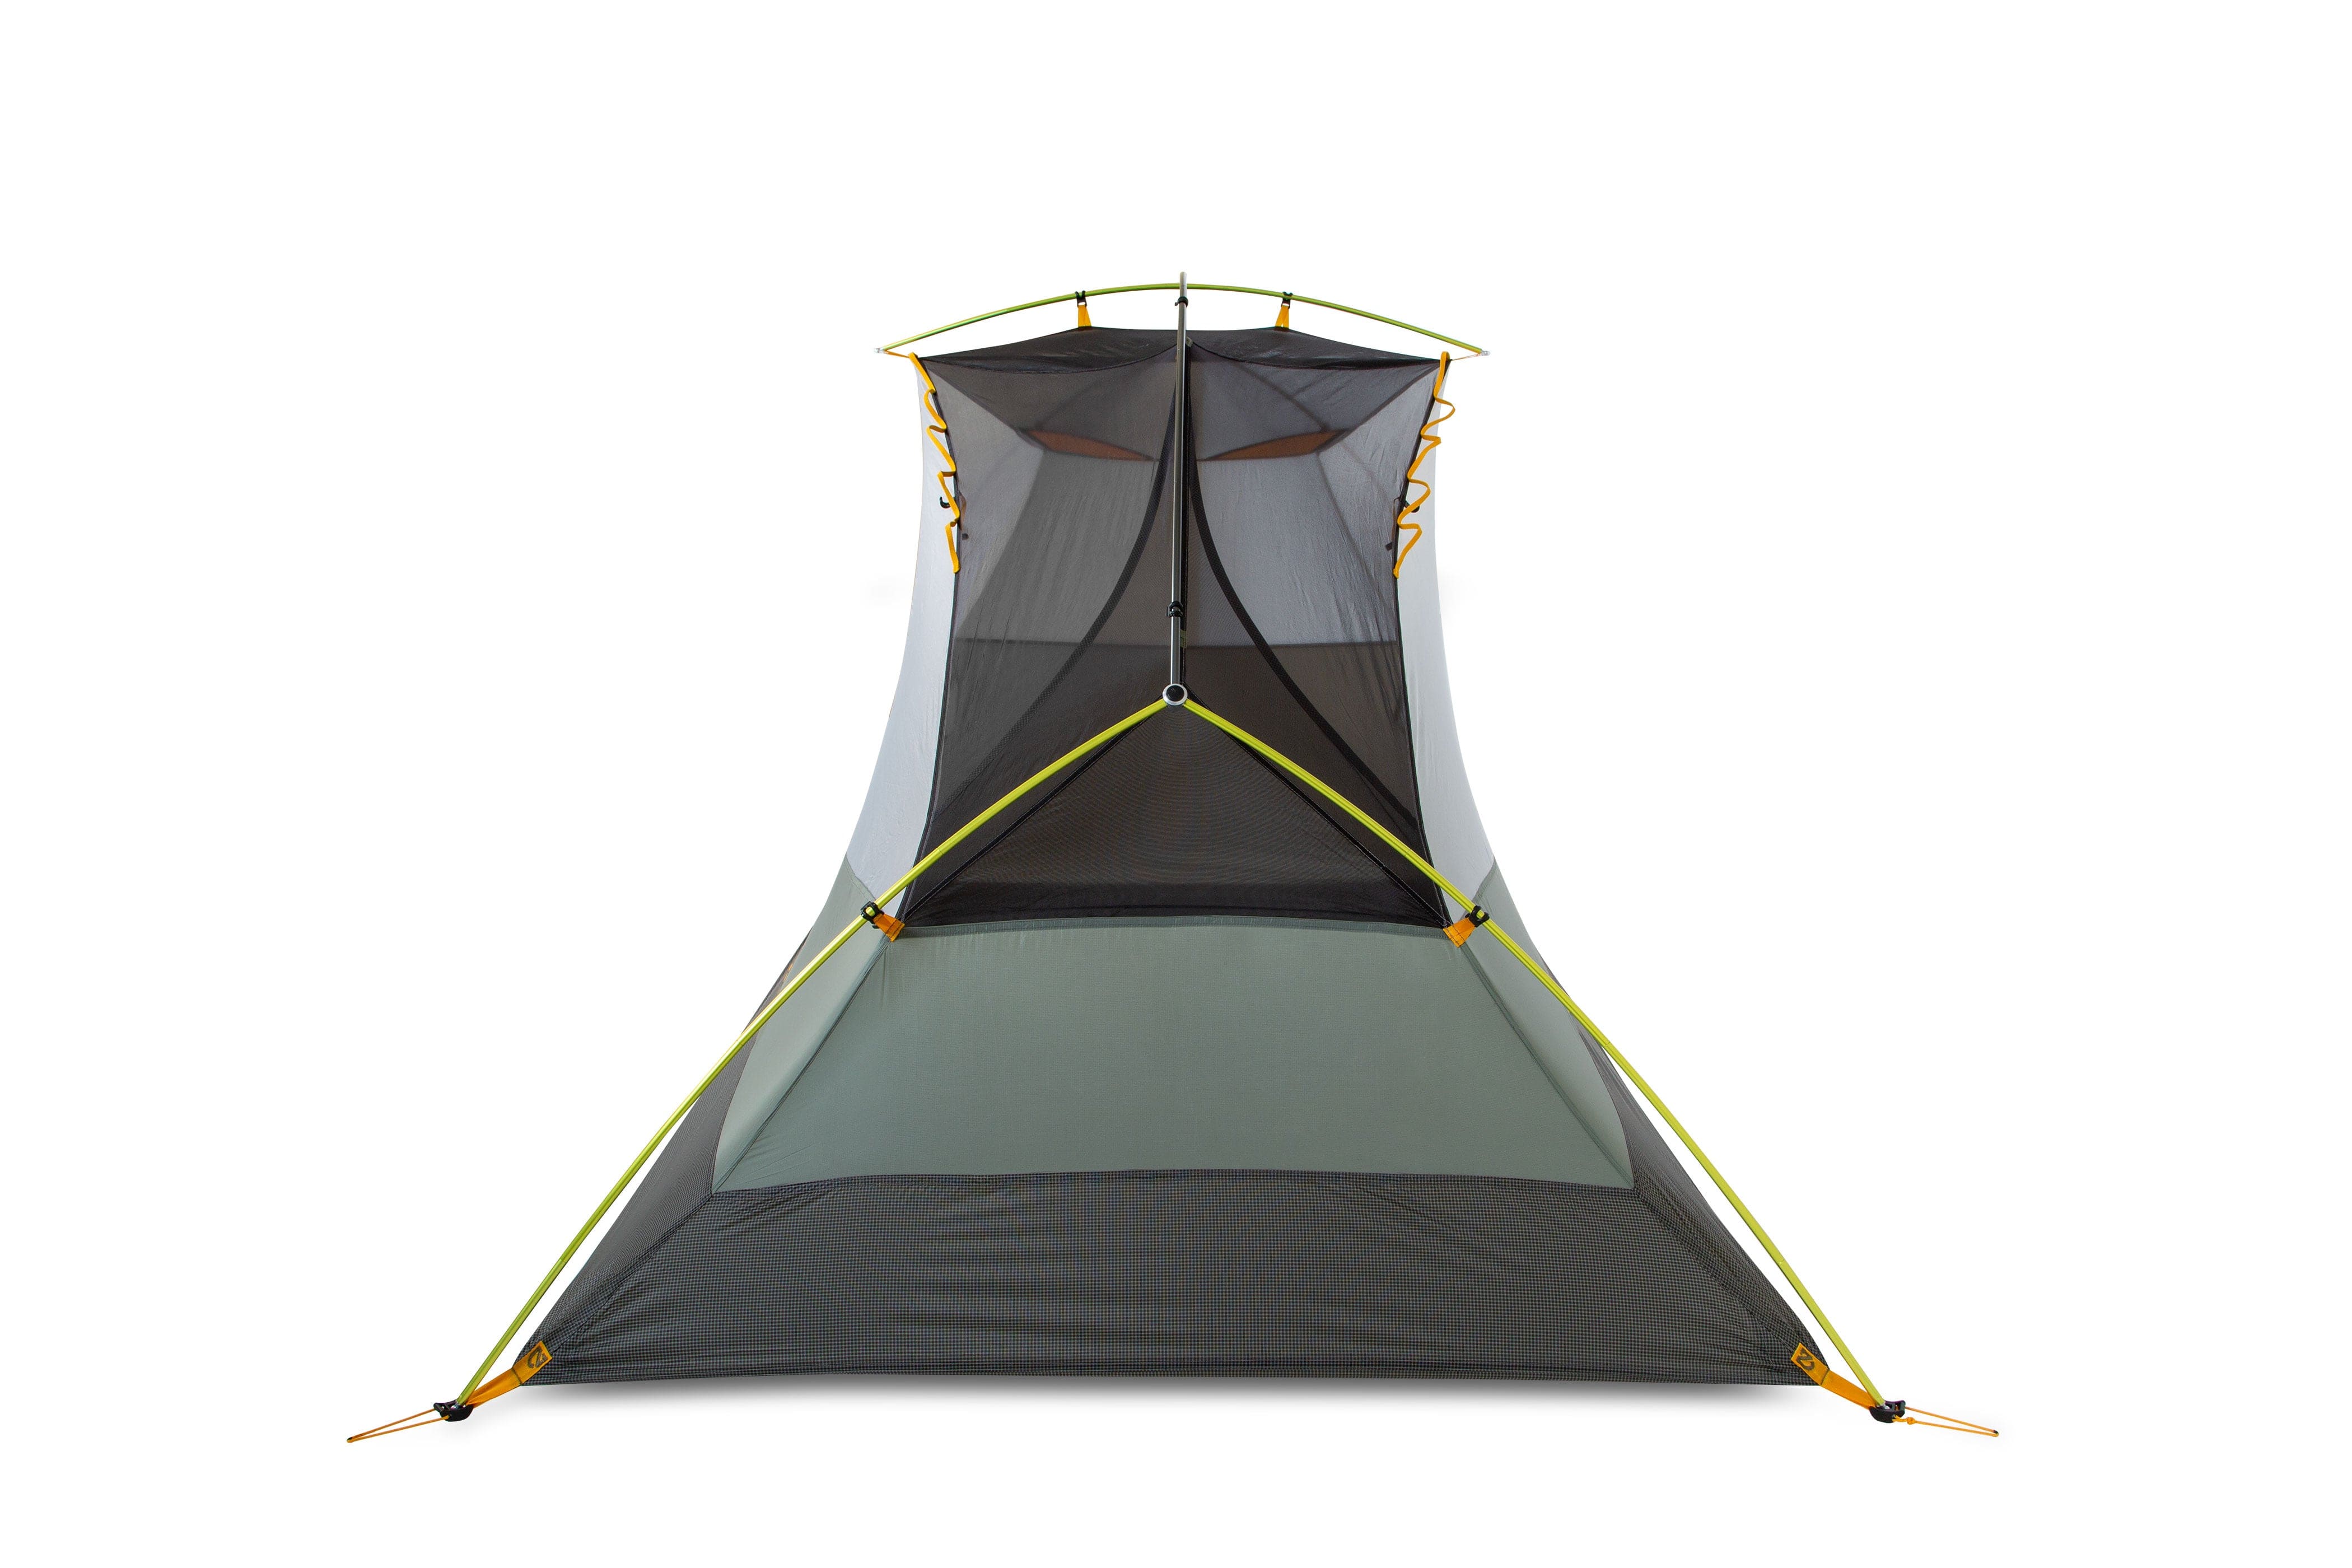 Nemo Tent 1 Person Dragonfly Bikepack OSMO Backpacking Tent 103858